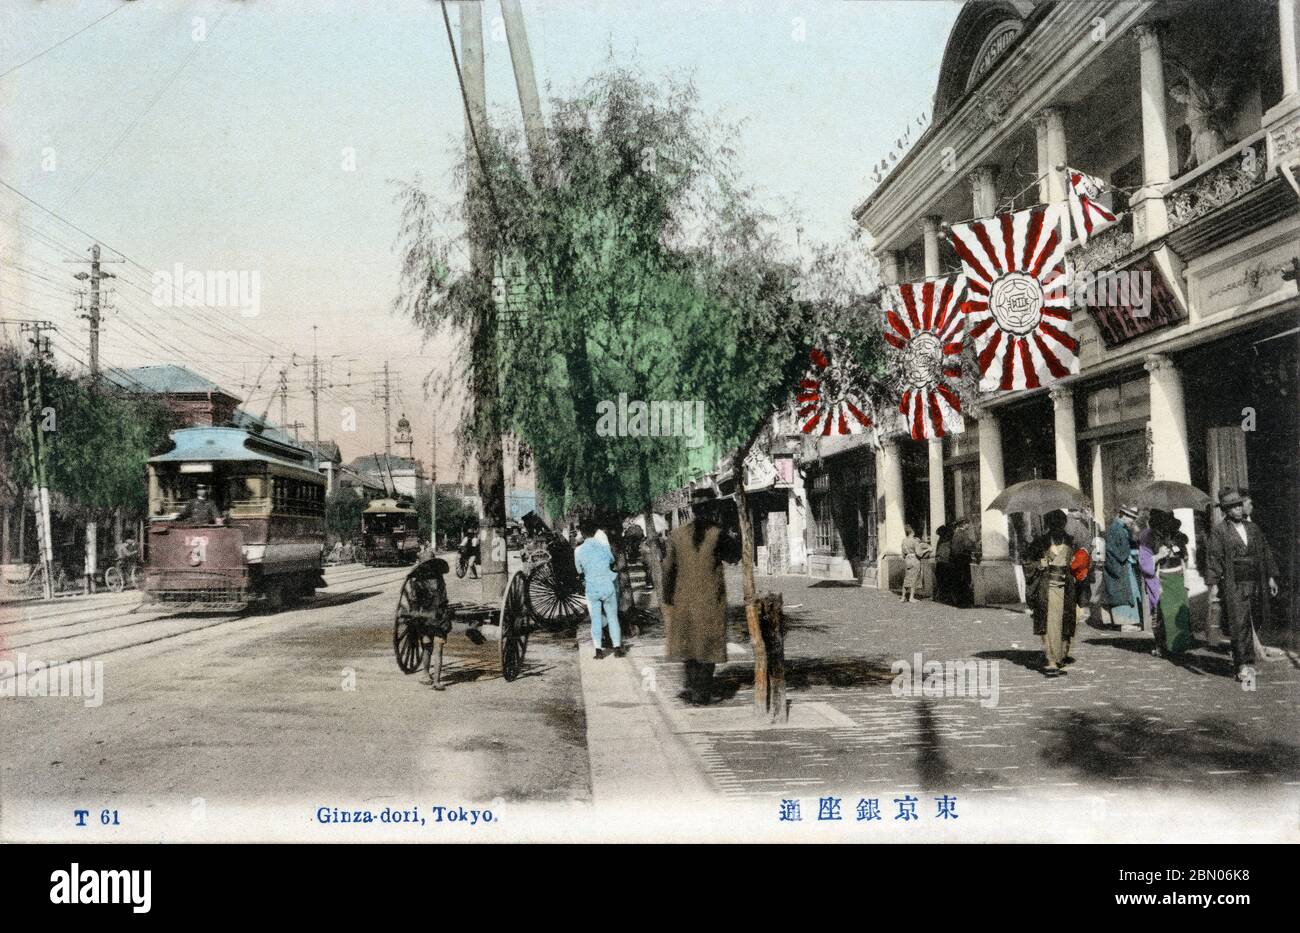 [ 1900s Japan - Ginza Street View, Tokyo ] —   Streetcars and pedestrians on Ginza in Tokyo, ca. 1907 (Meiji 40).  The building on the right, with the rising sun flags (旭日旗, Kyokujitsu-ki), is Tenshodo (天賞堂).  In the far background, the landmark tower of the Hattori Building (服部時計店ビル) can be seen.  20th century vintage postcard. Stock Photo